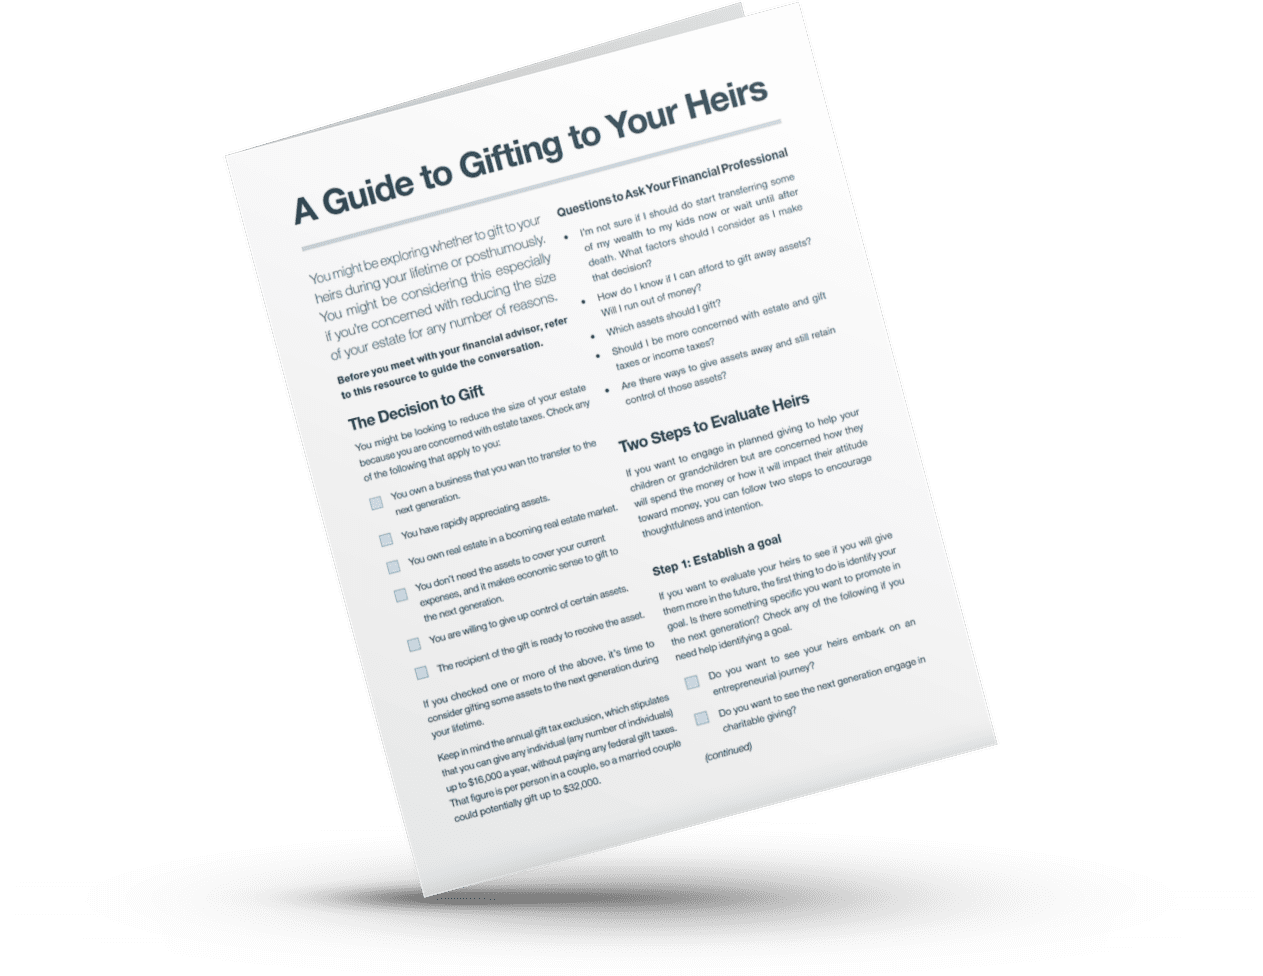 A Guide to Gifting to Your Heirs